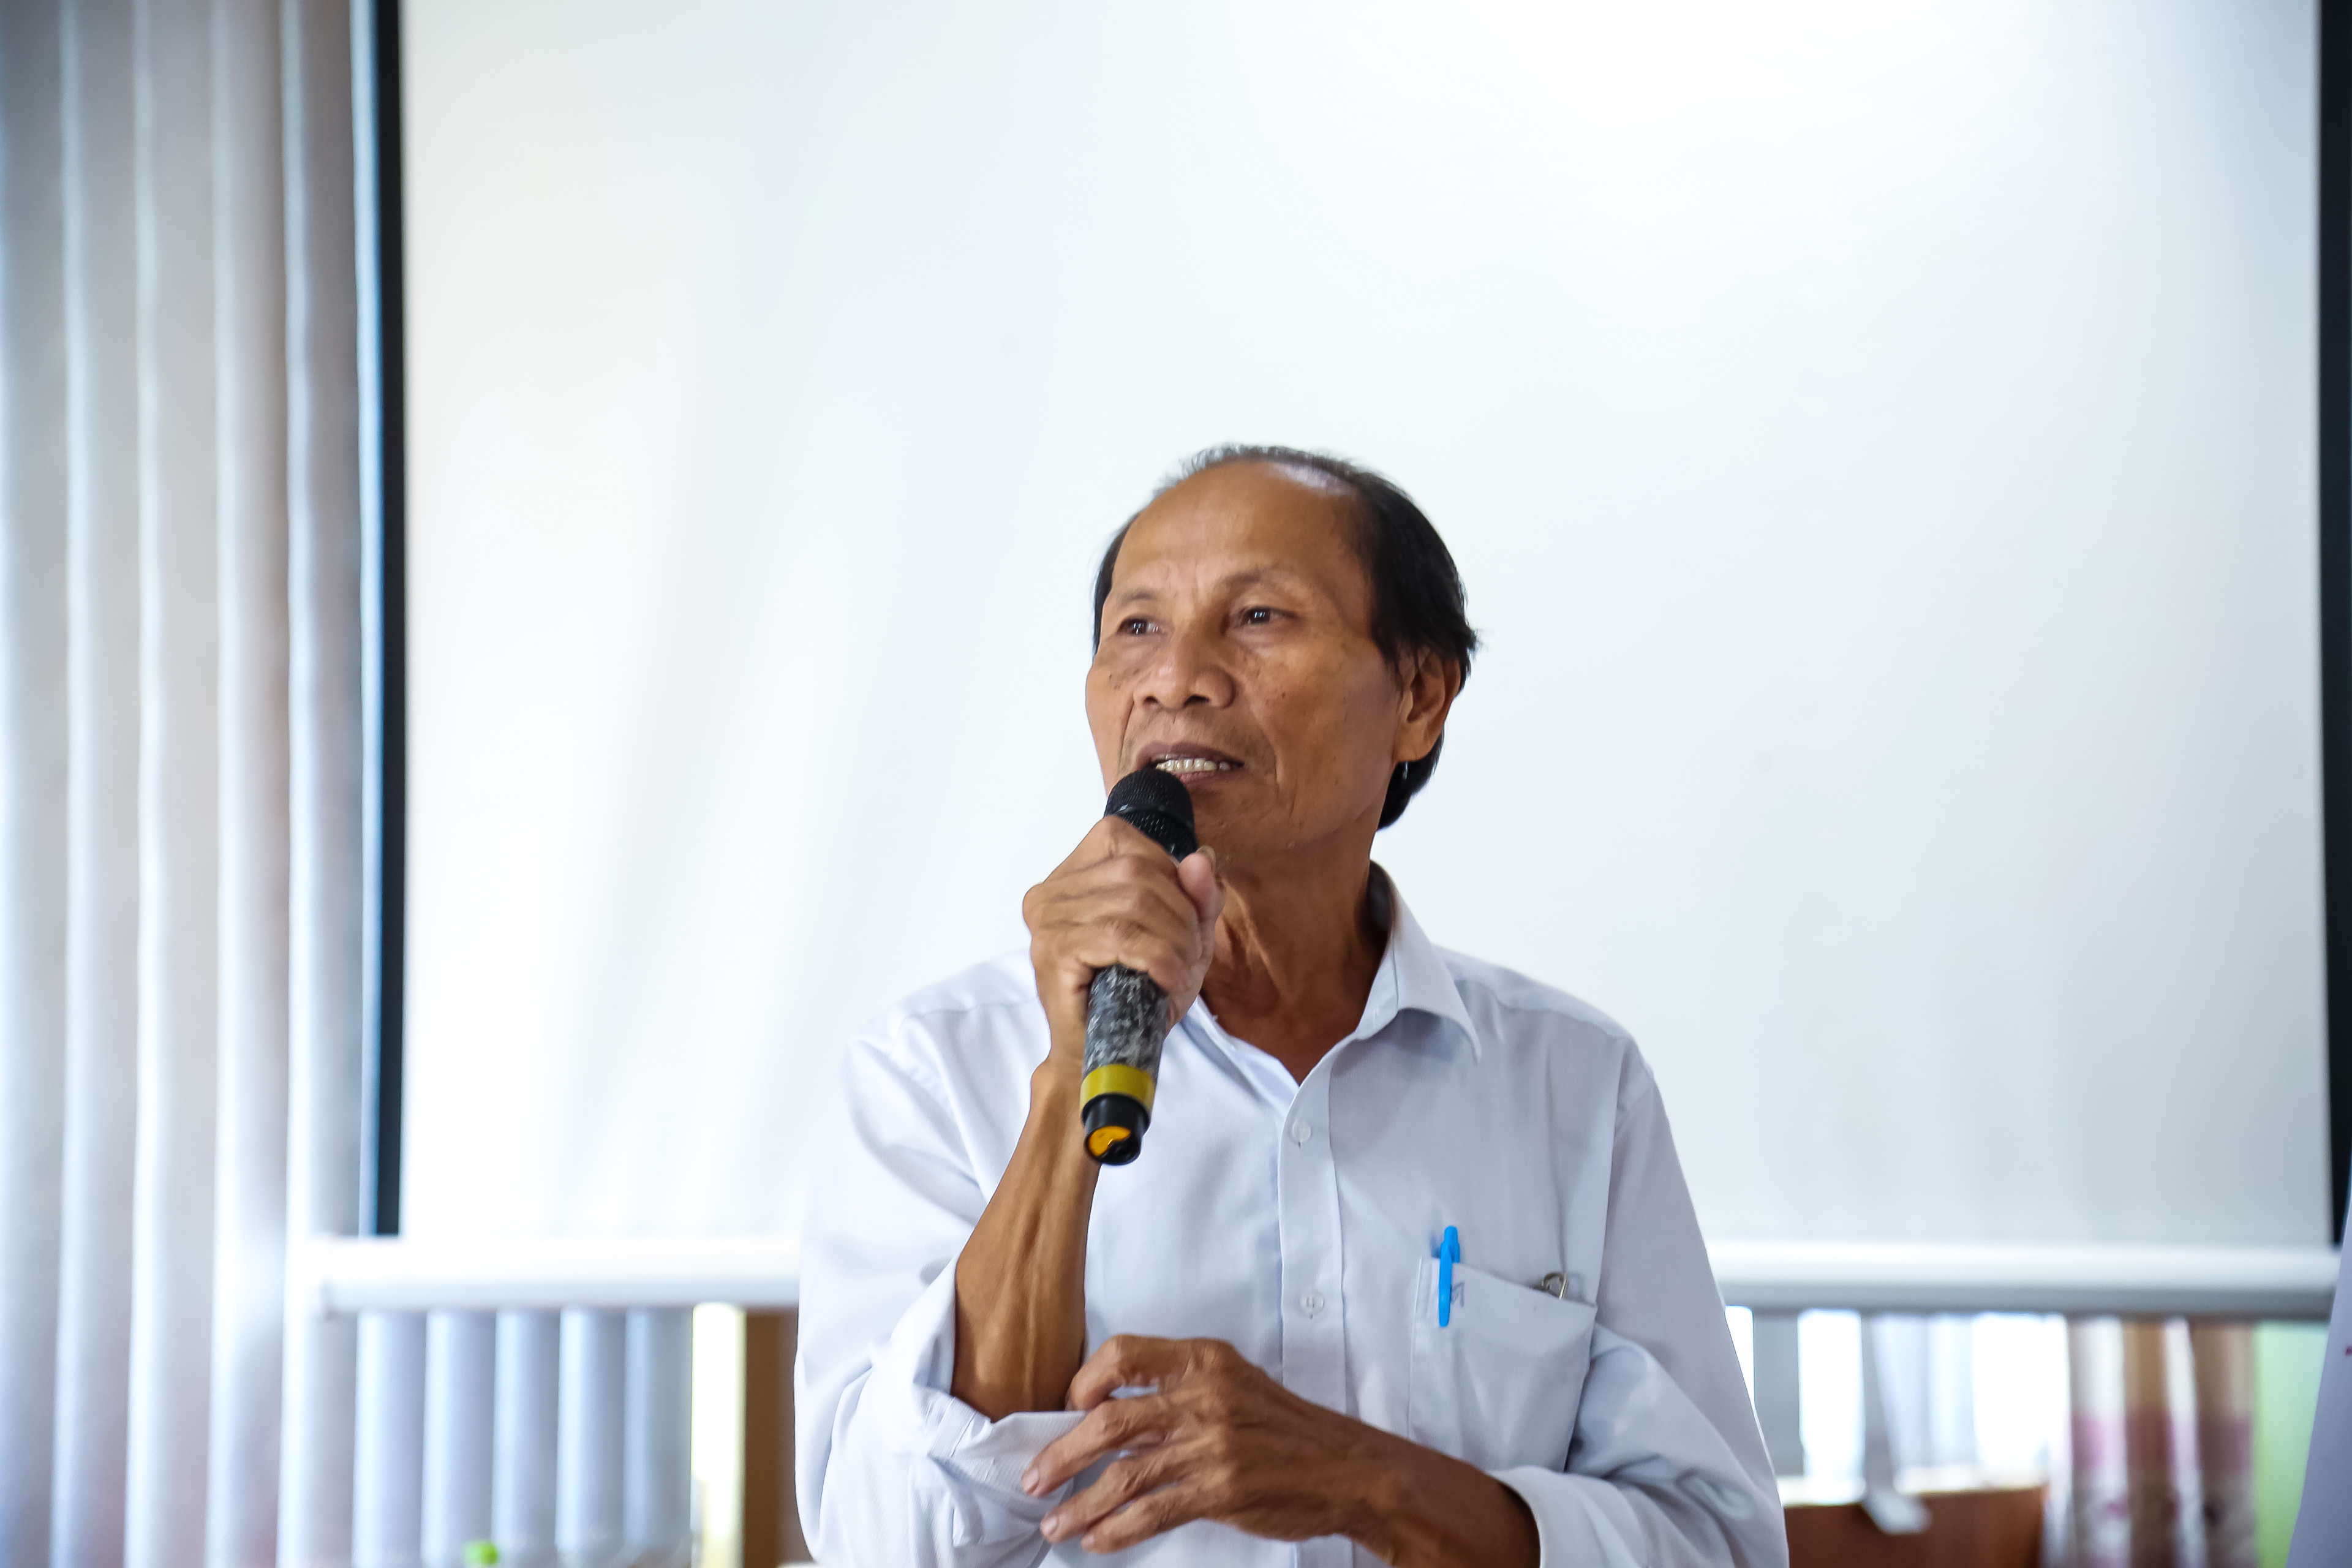 Tam Kim, 65, shares that he no longer behaves violently, and refuses to contribute to a culture of harmful masculinity. Photo: UN Women/Thao Hoang.